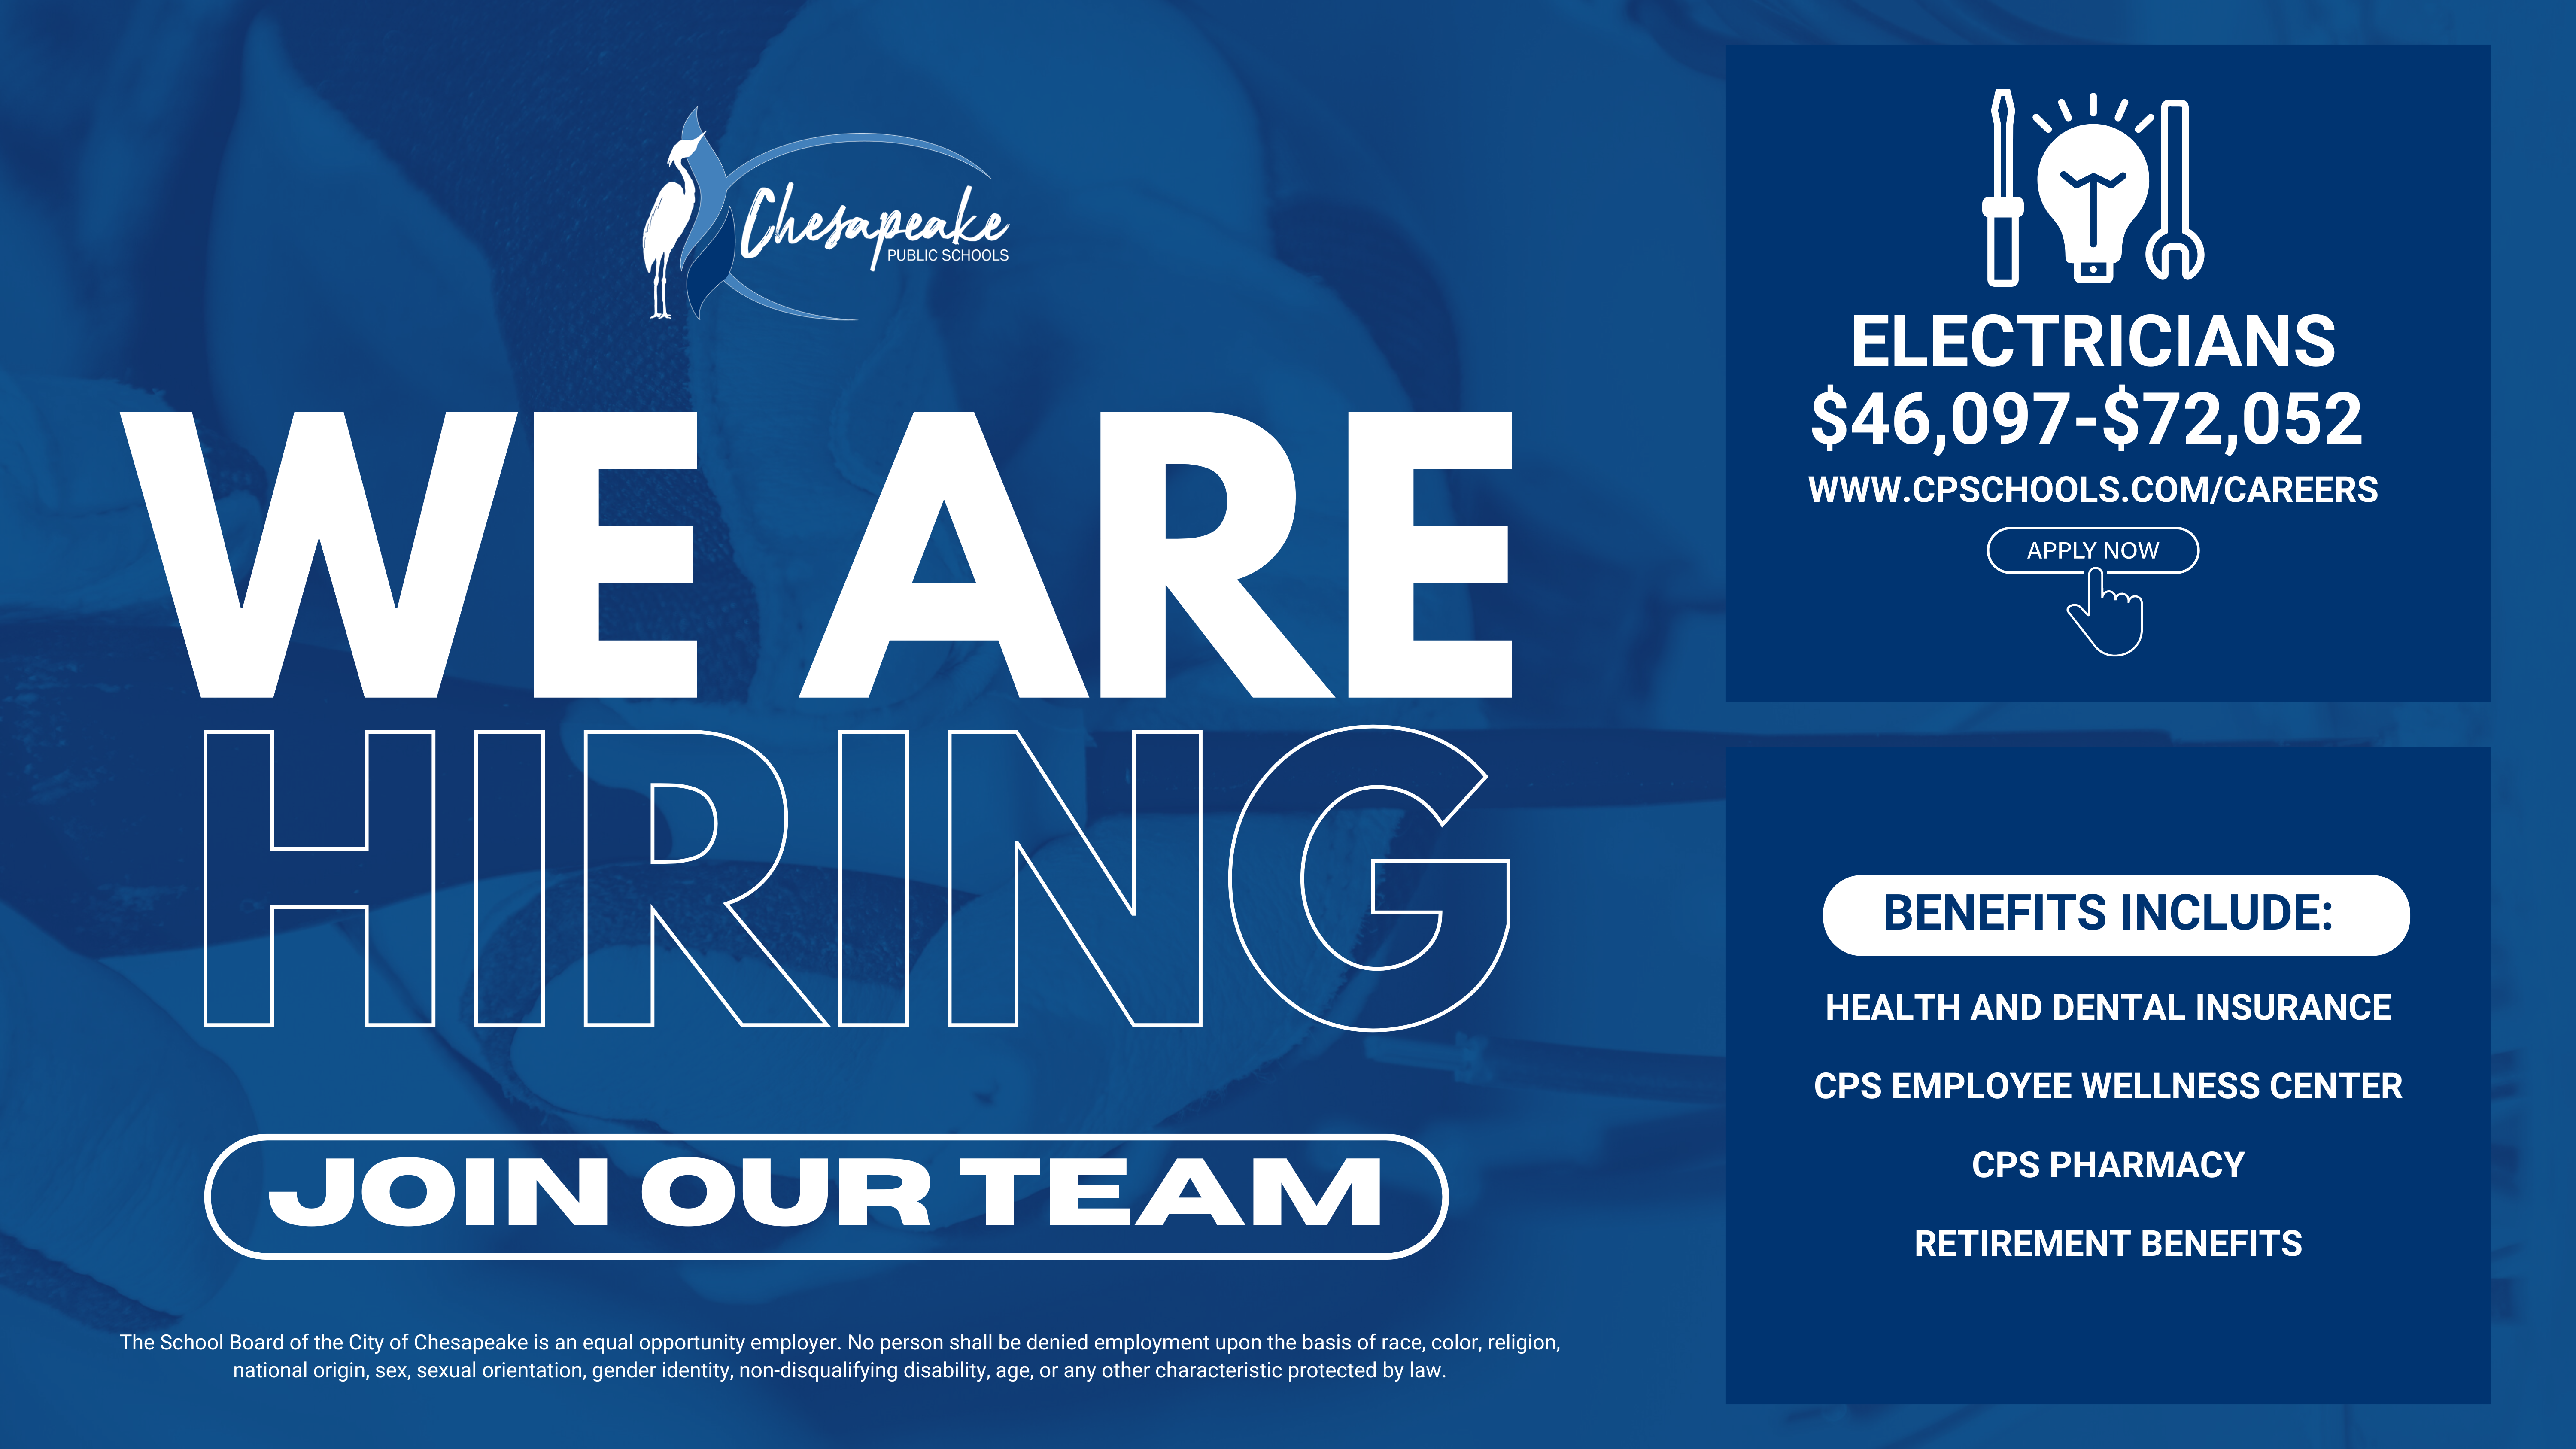 WE ARE HIRING - Join our team!  Electricians ($46,097-$72,052), benefits include: Health &amp; Dental Insurance, CPS Employee Wellness Center, CPS Pharmacy, Retirement Benefits